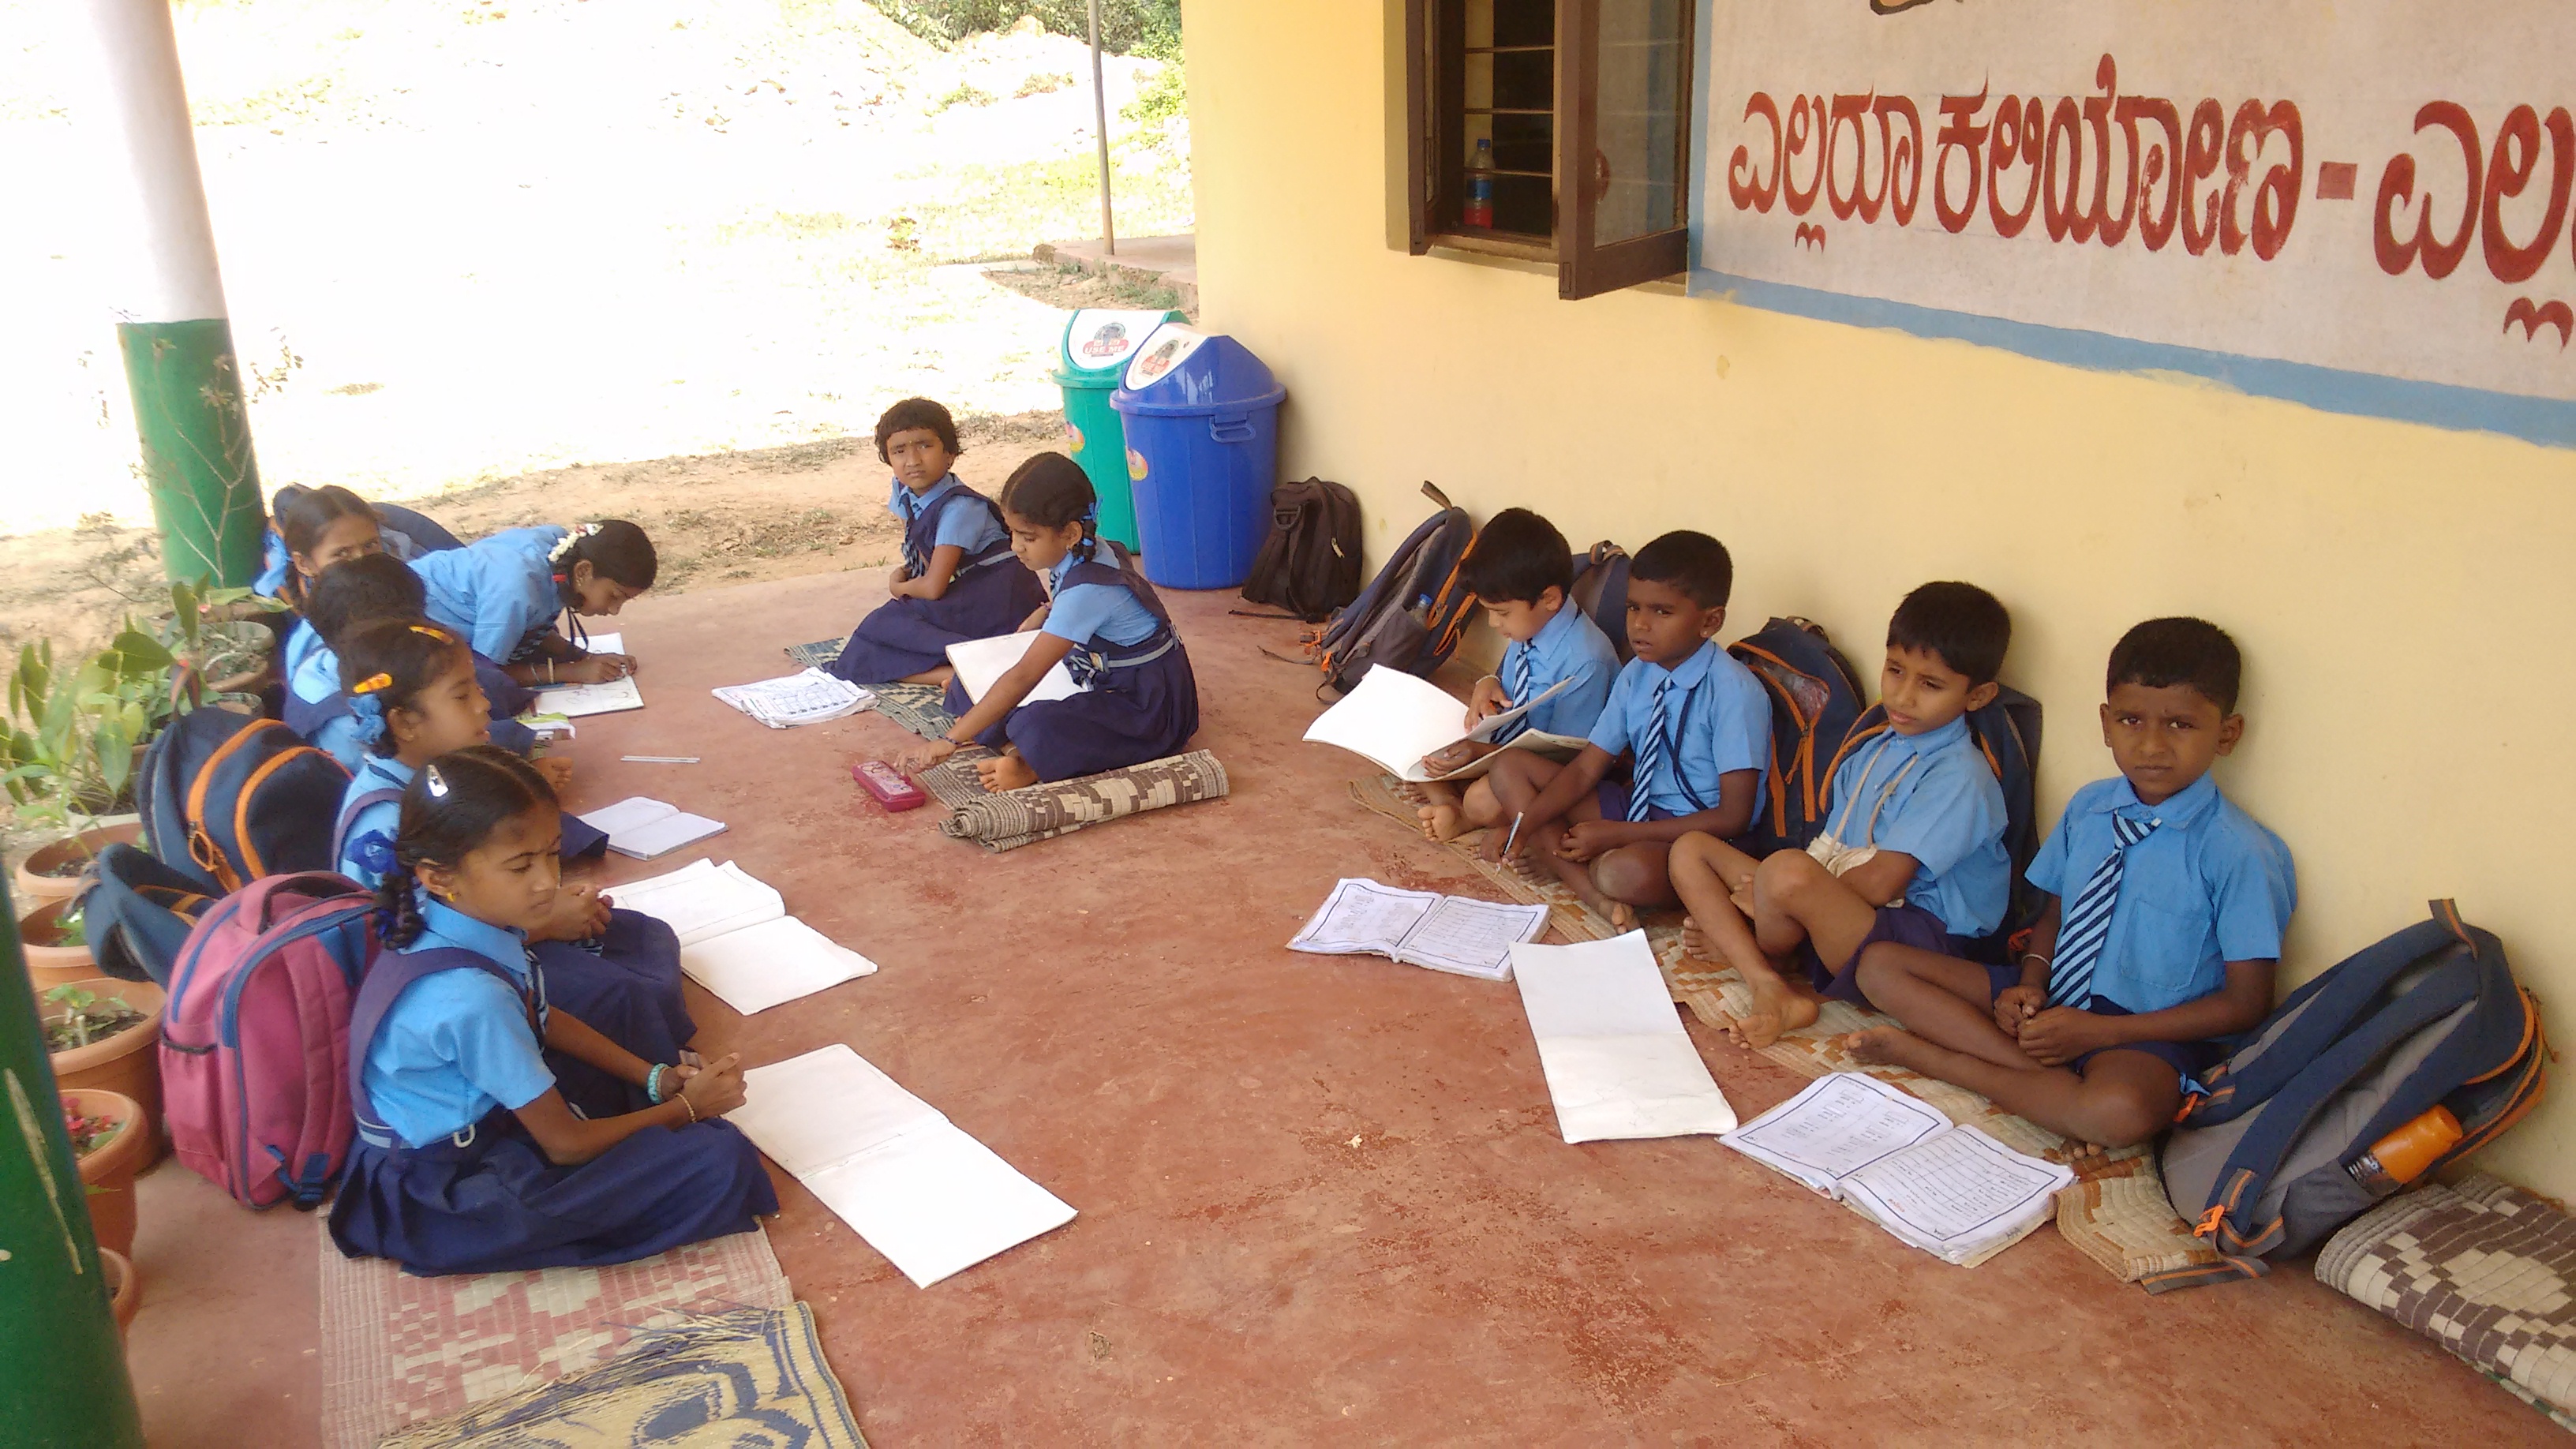 K'taka Govt School Teachers' Fight for Recovery and Survival | NewsClick